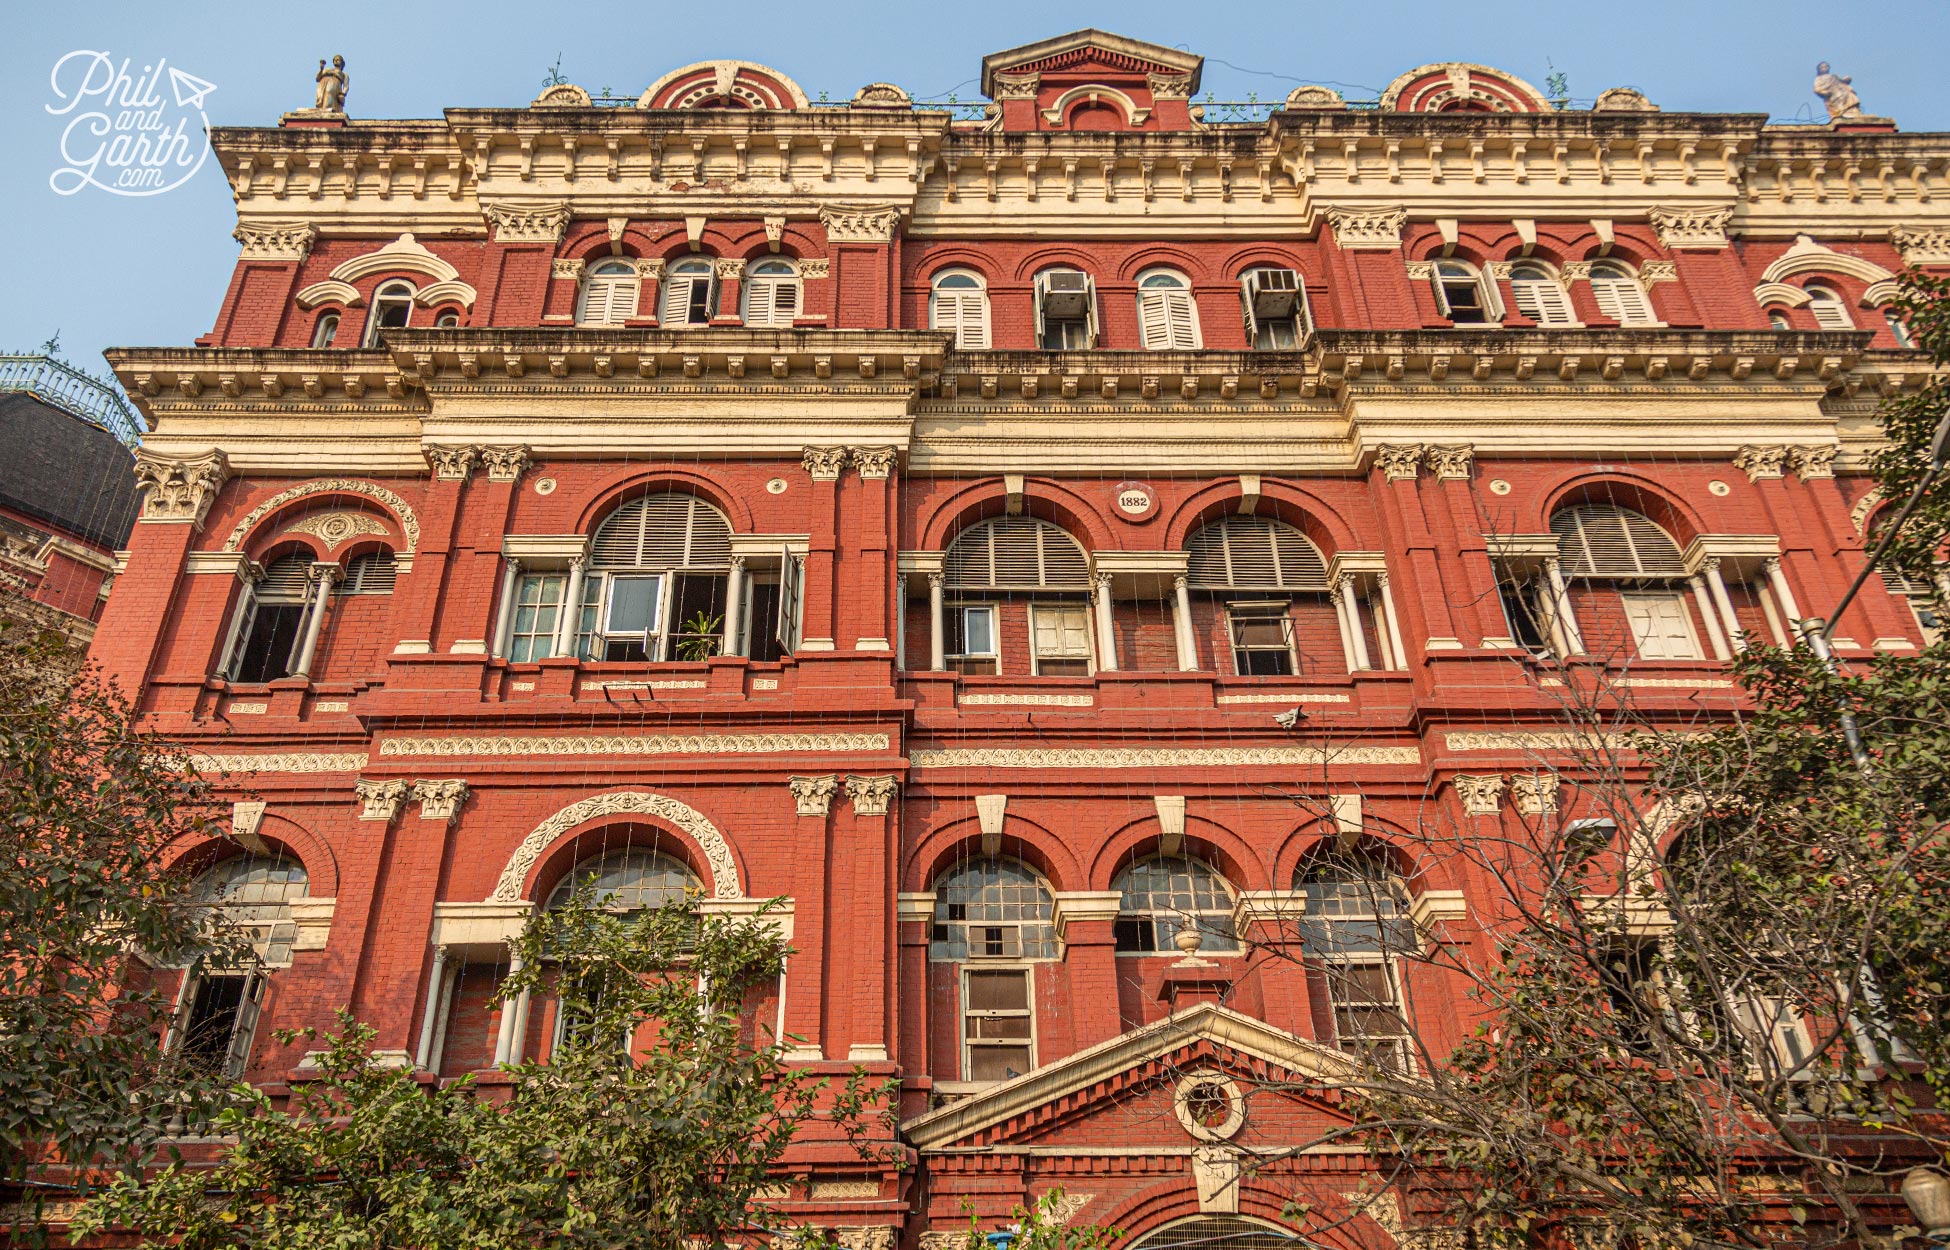 The red brick of the Writers Building - Kolkata's oldest building